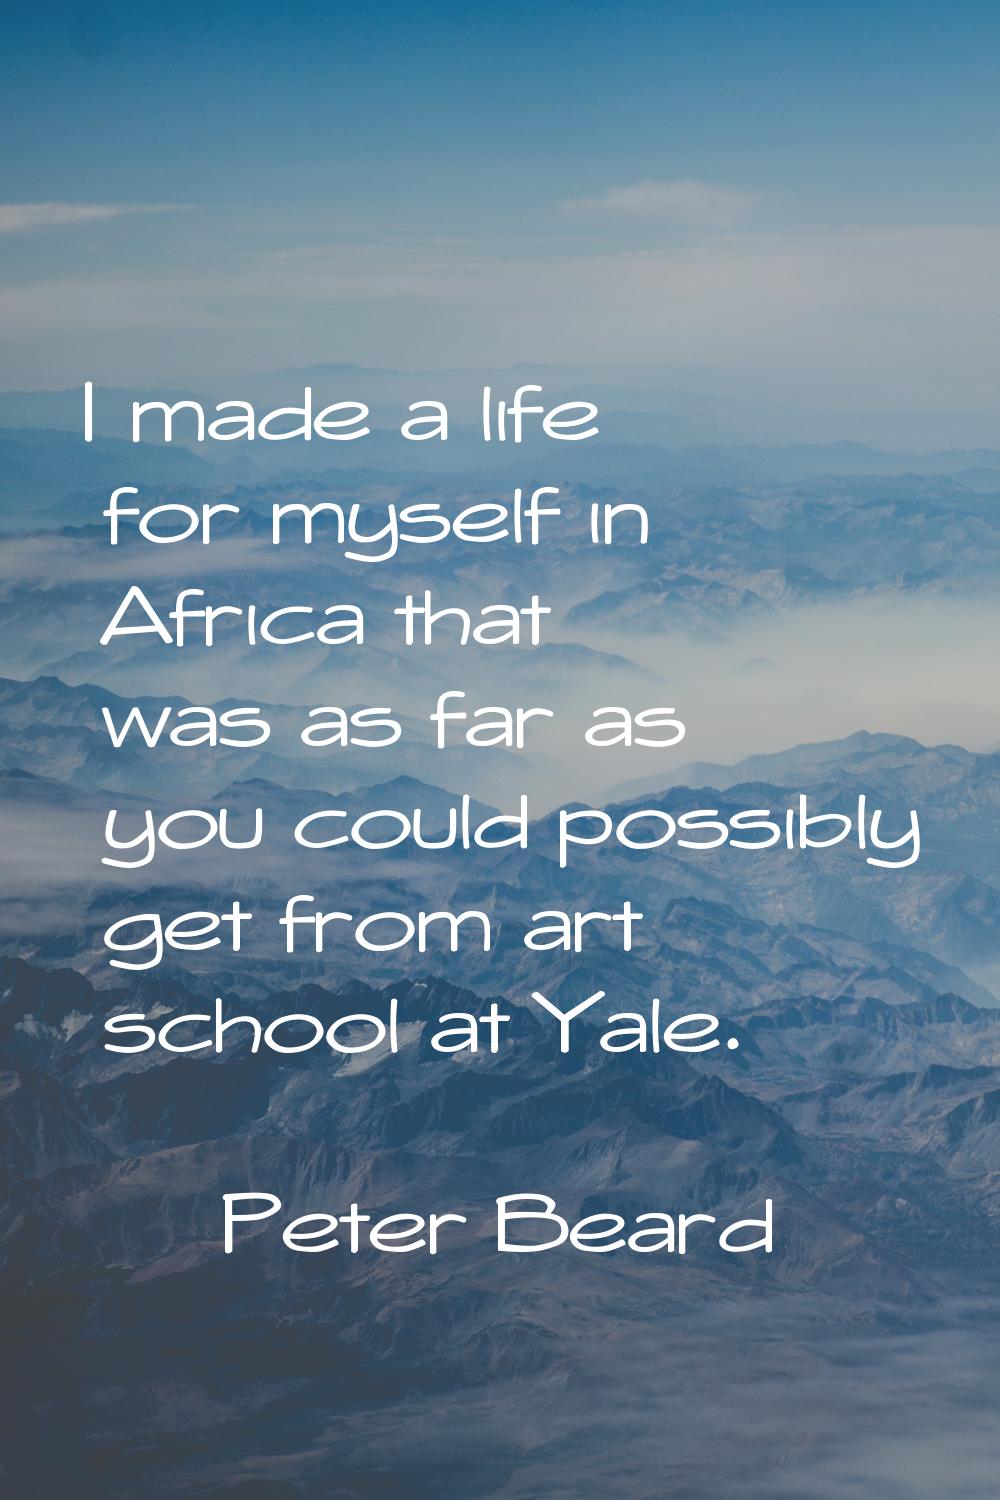 I made a life for myself in Africa that was as far as you could possibly get from art school at Yal